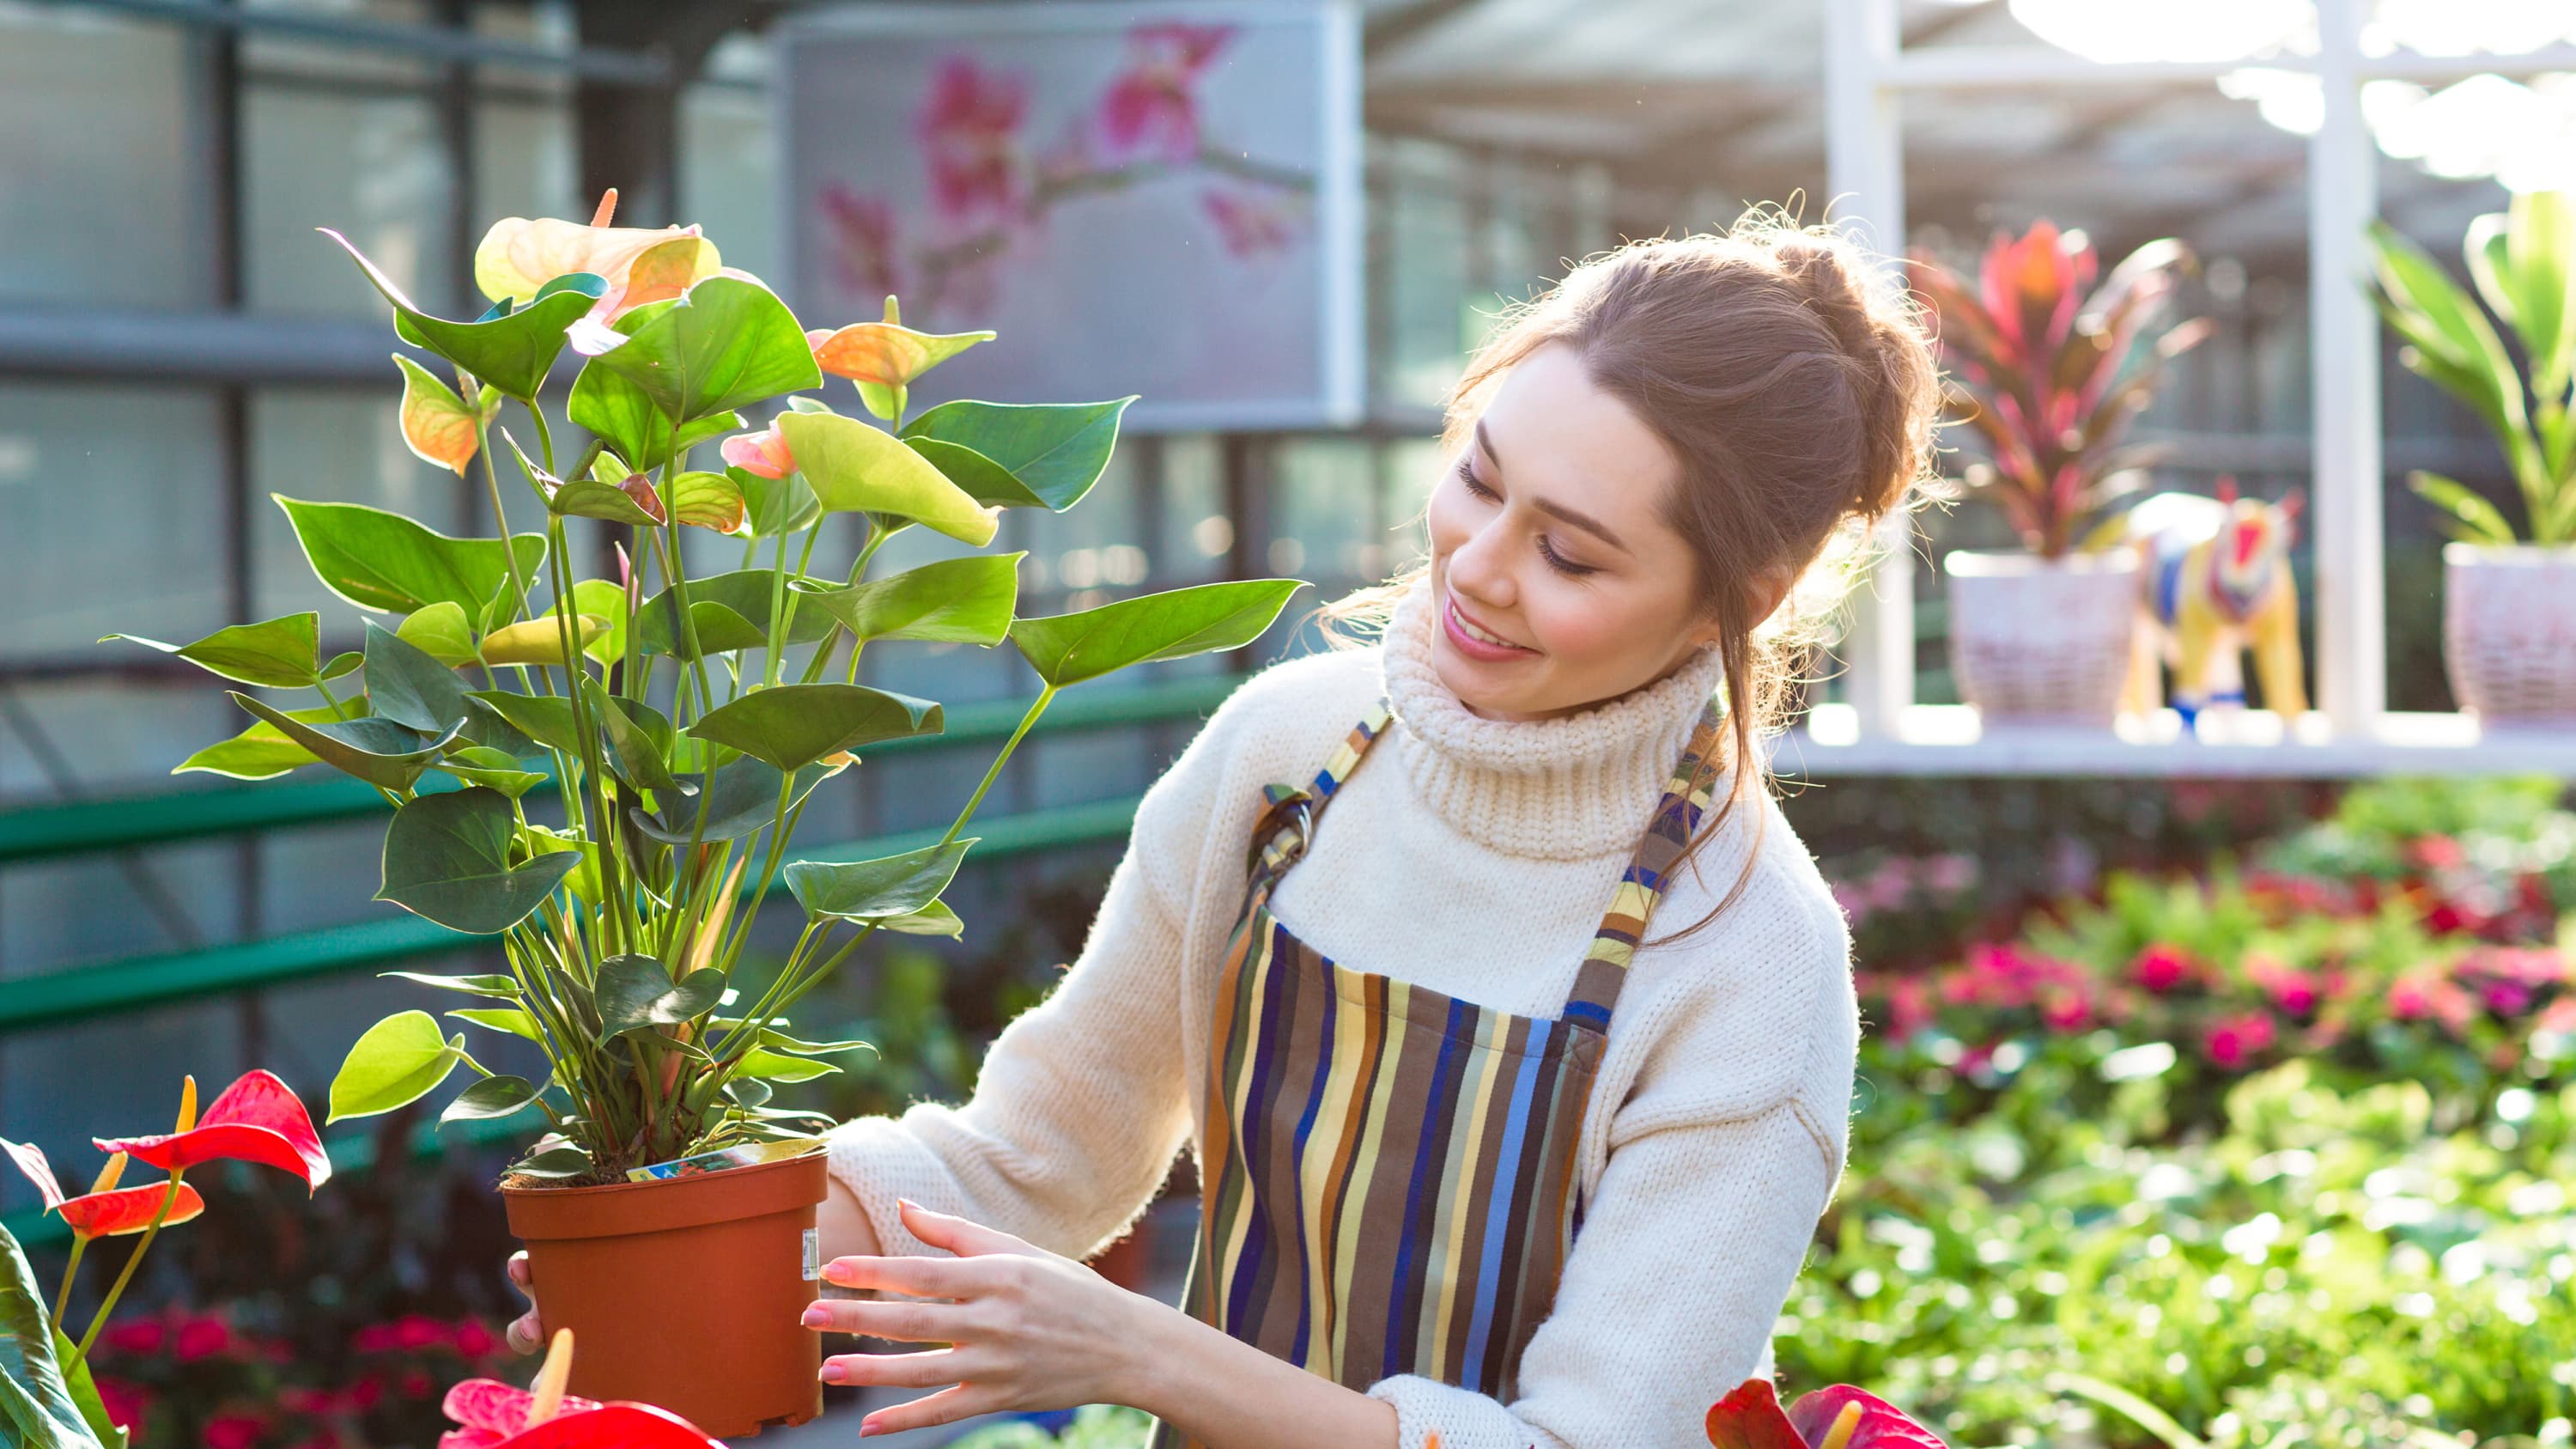 A woman is gardening with a striped apron on, she is inspecting a potted plant who could be wearing sunscreen to prevent squamous cell carcinoma